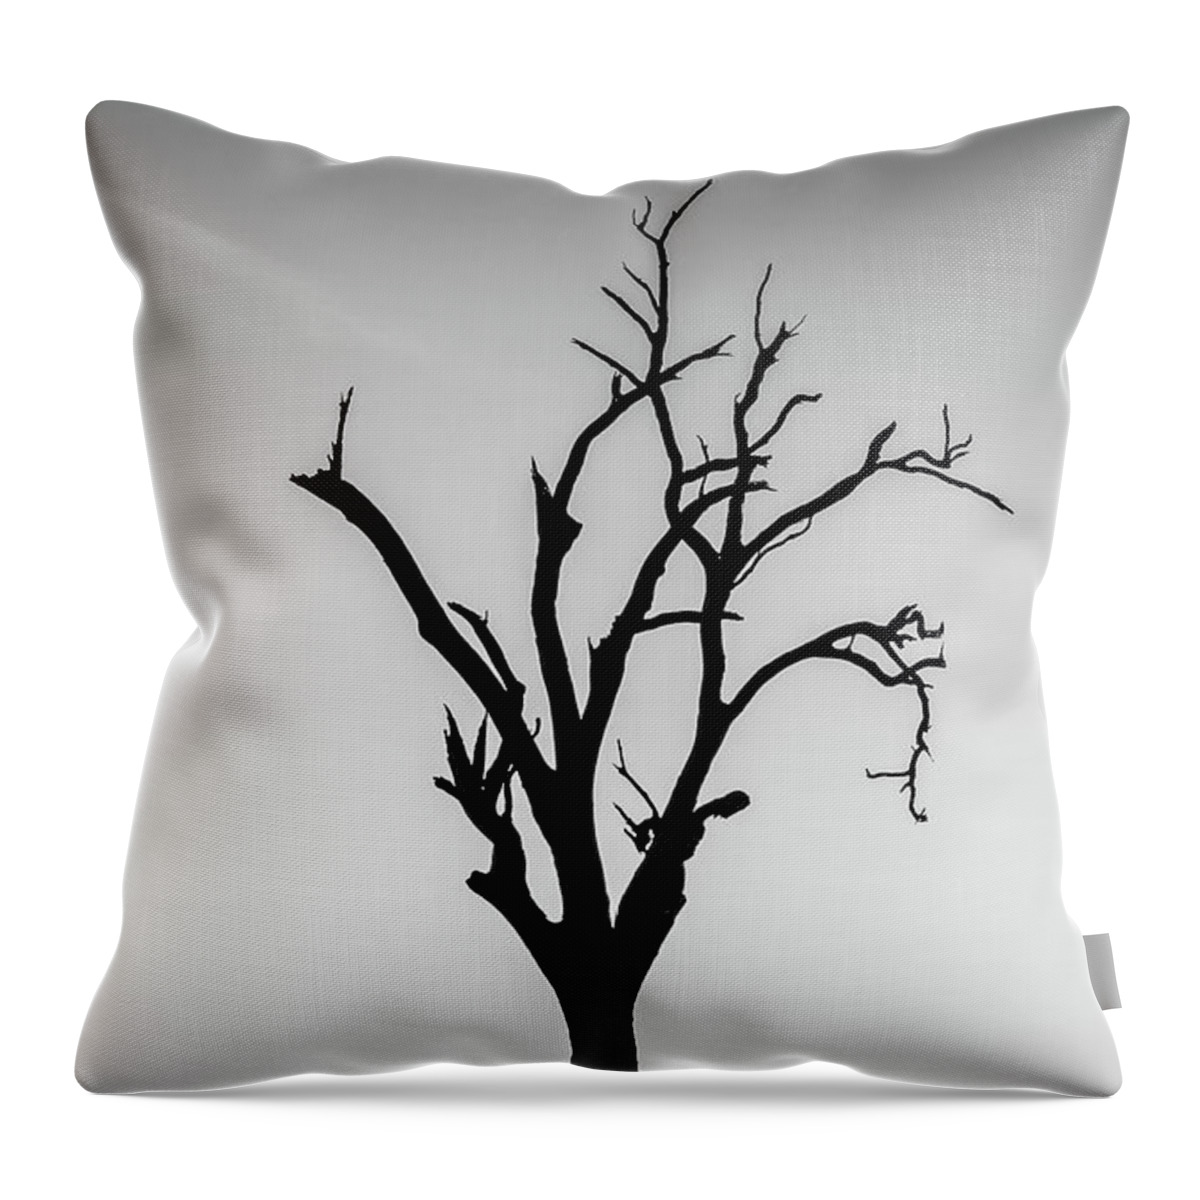 Matong State Forest Throw Pillow featuring the photograph Missing by Az Jackson